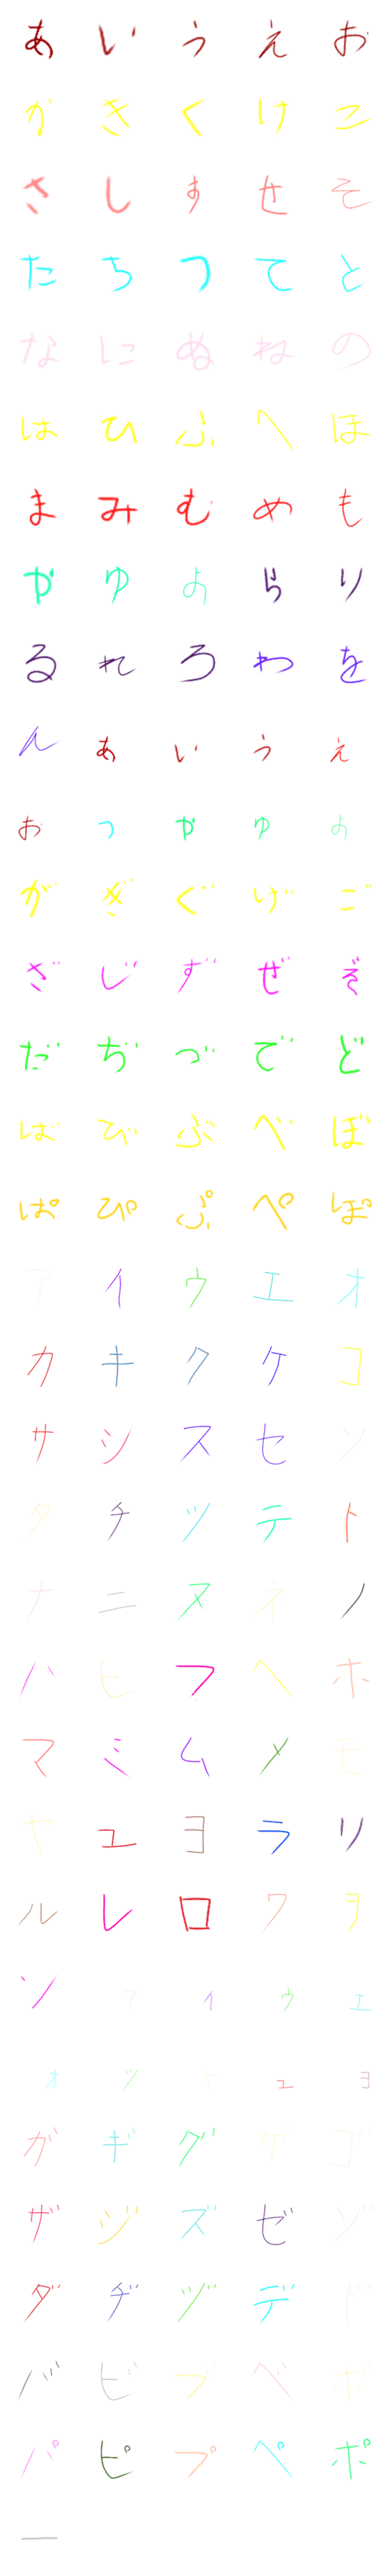 [LINE絵文字]花のかな文字の画像一覧